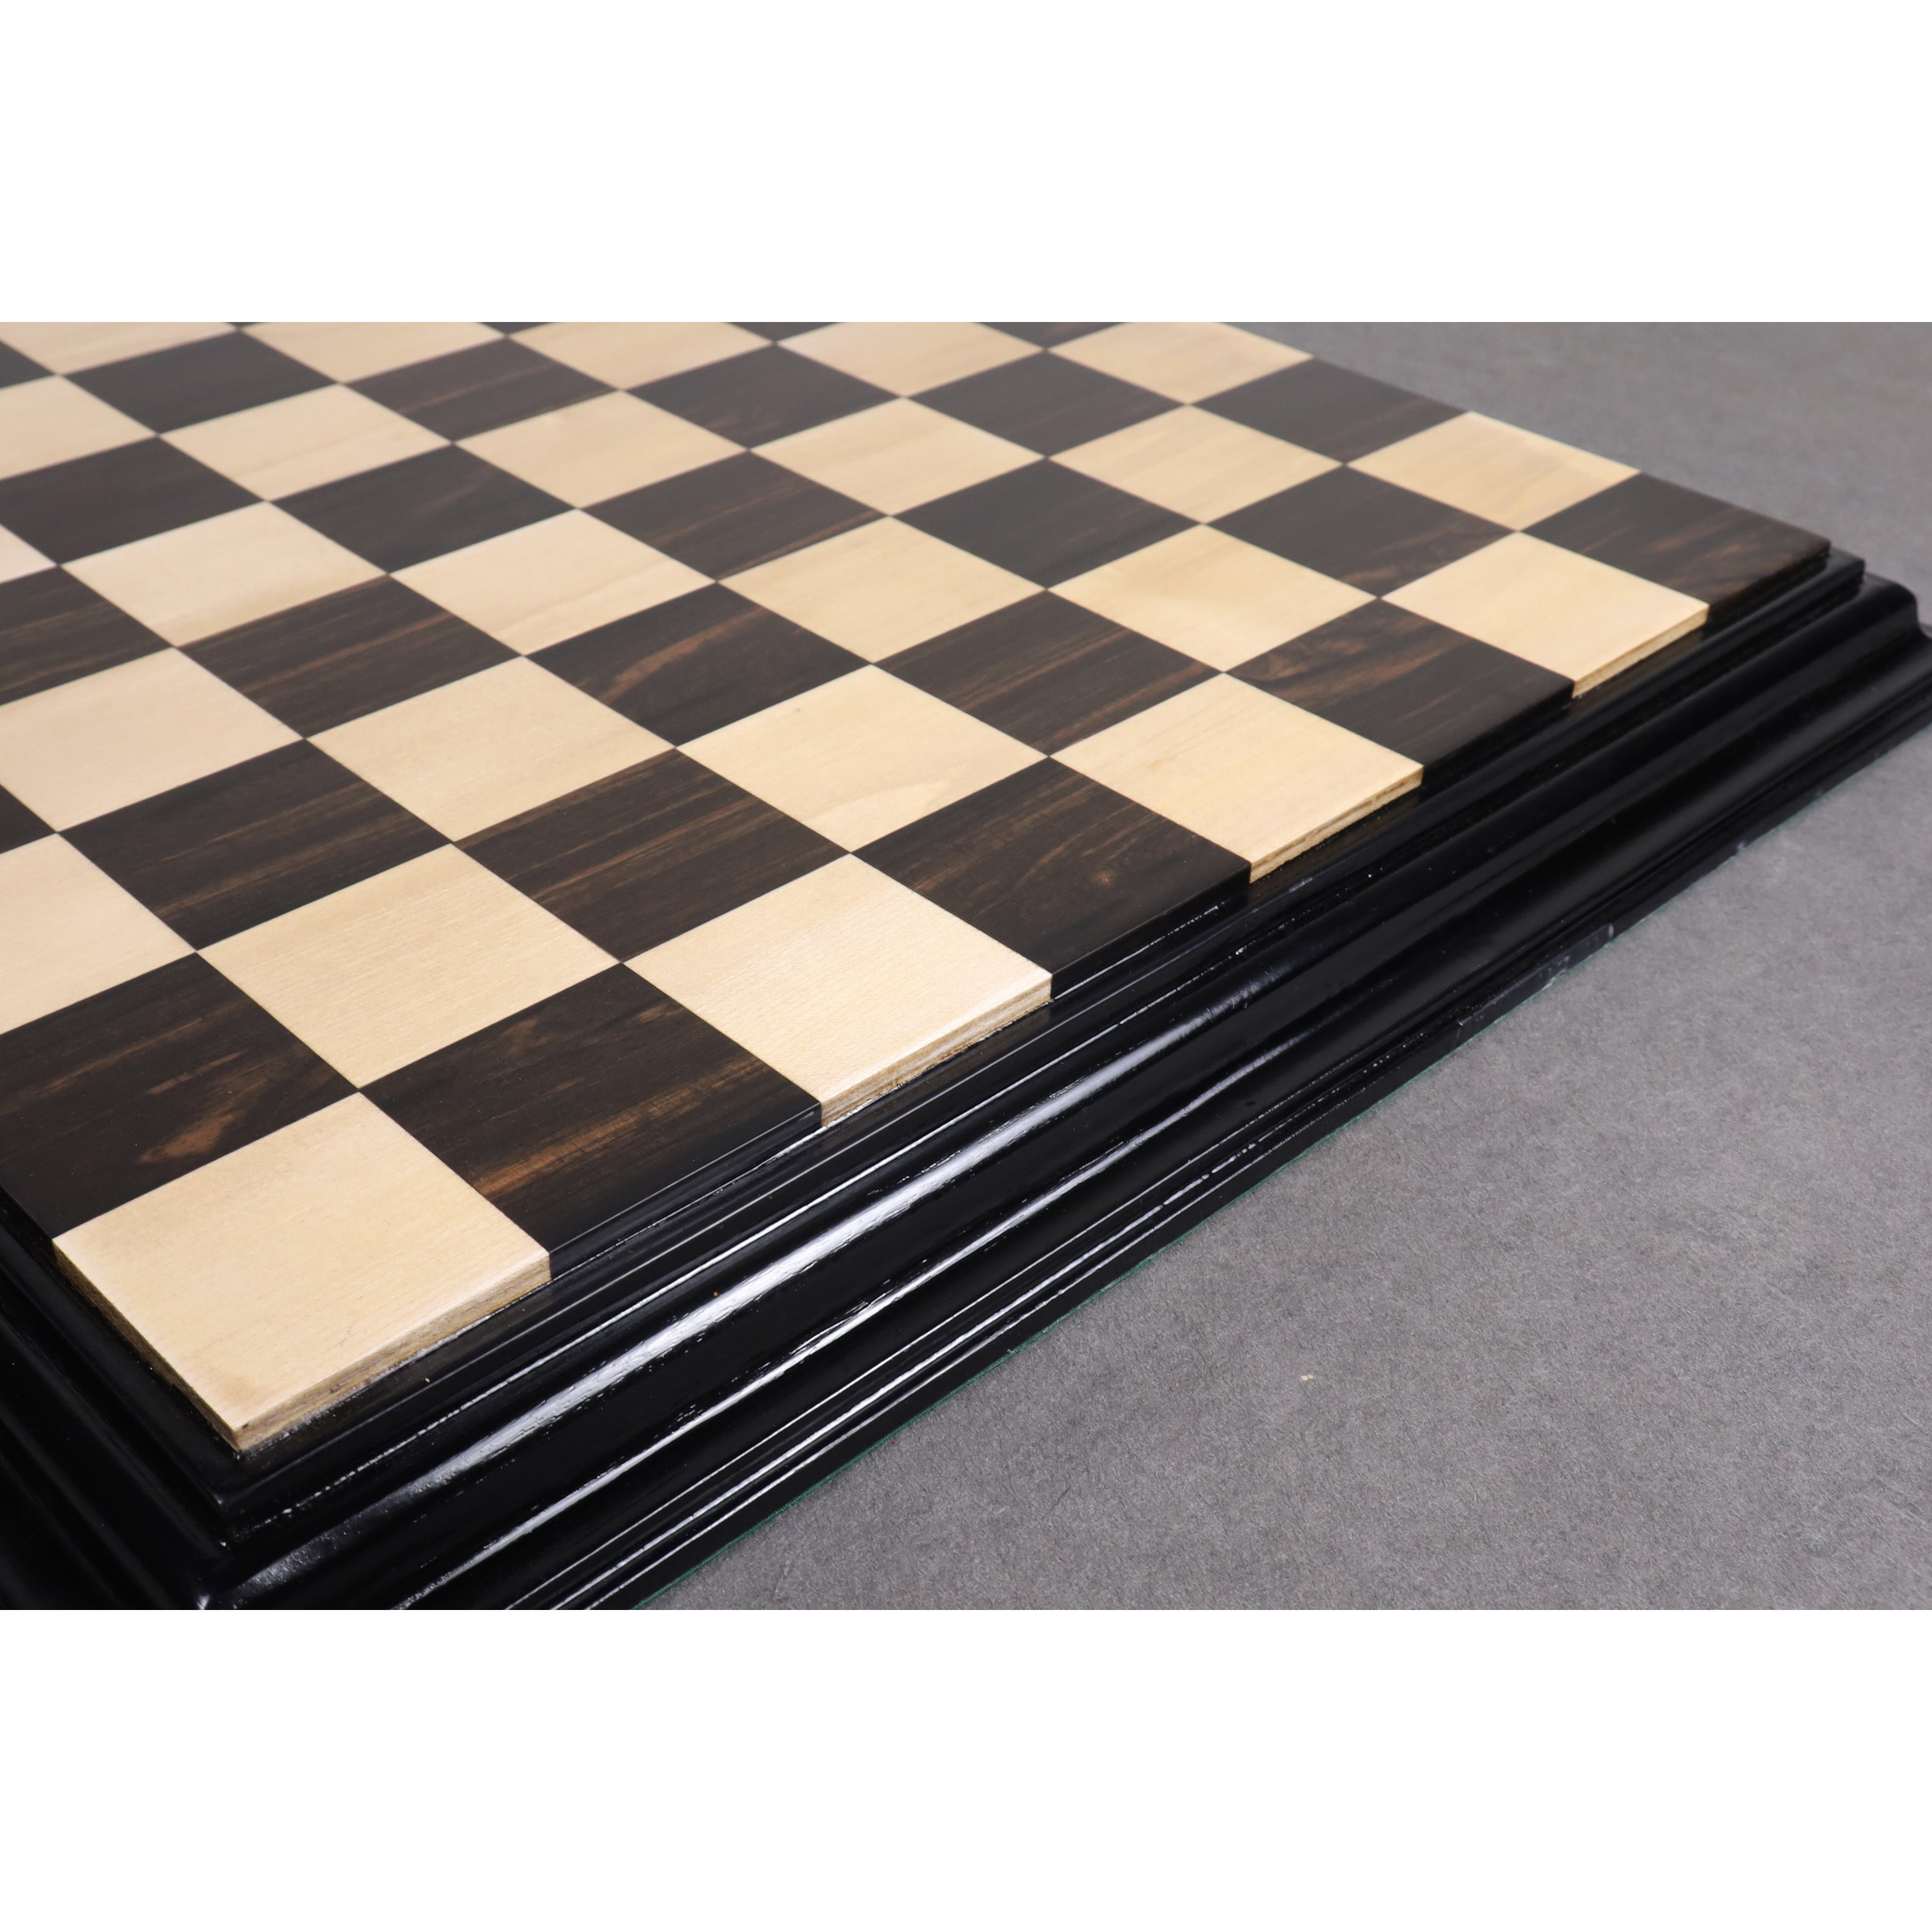 Combo of 4.5″ Carvers’ Art Luxury Chess Set - Pieces in Ebony Wood with Board and Box